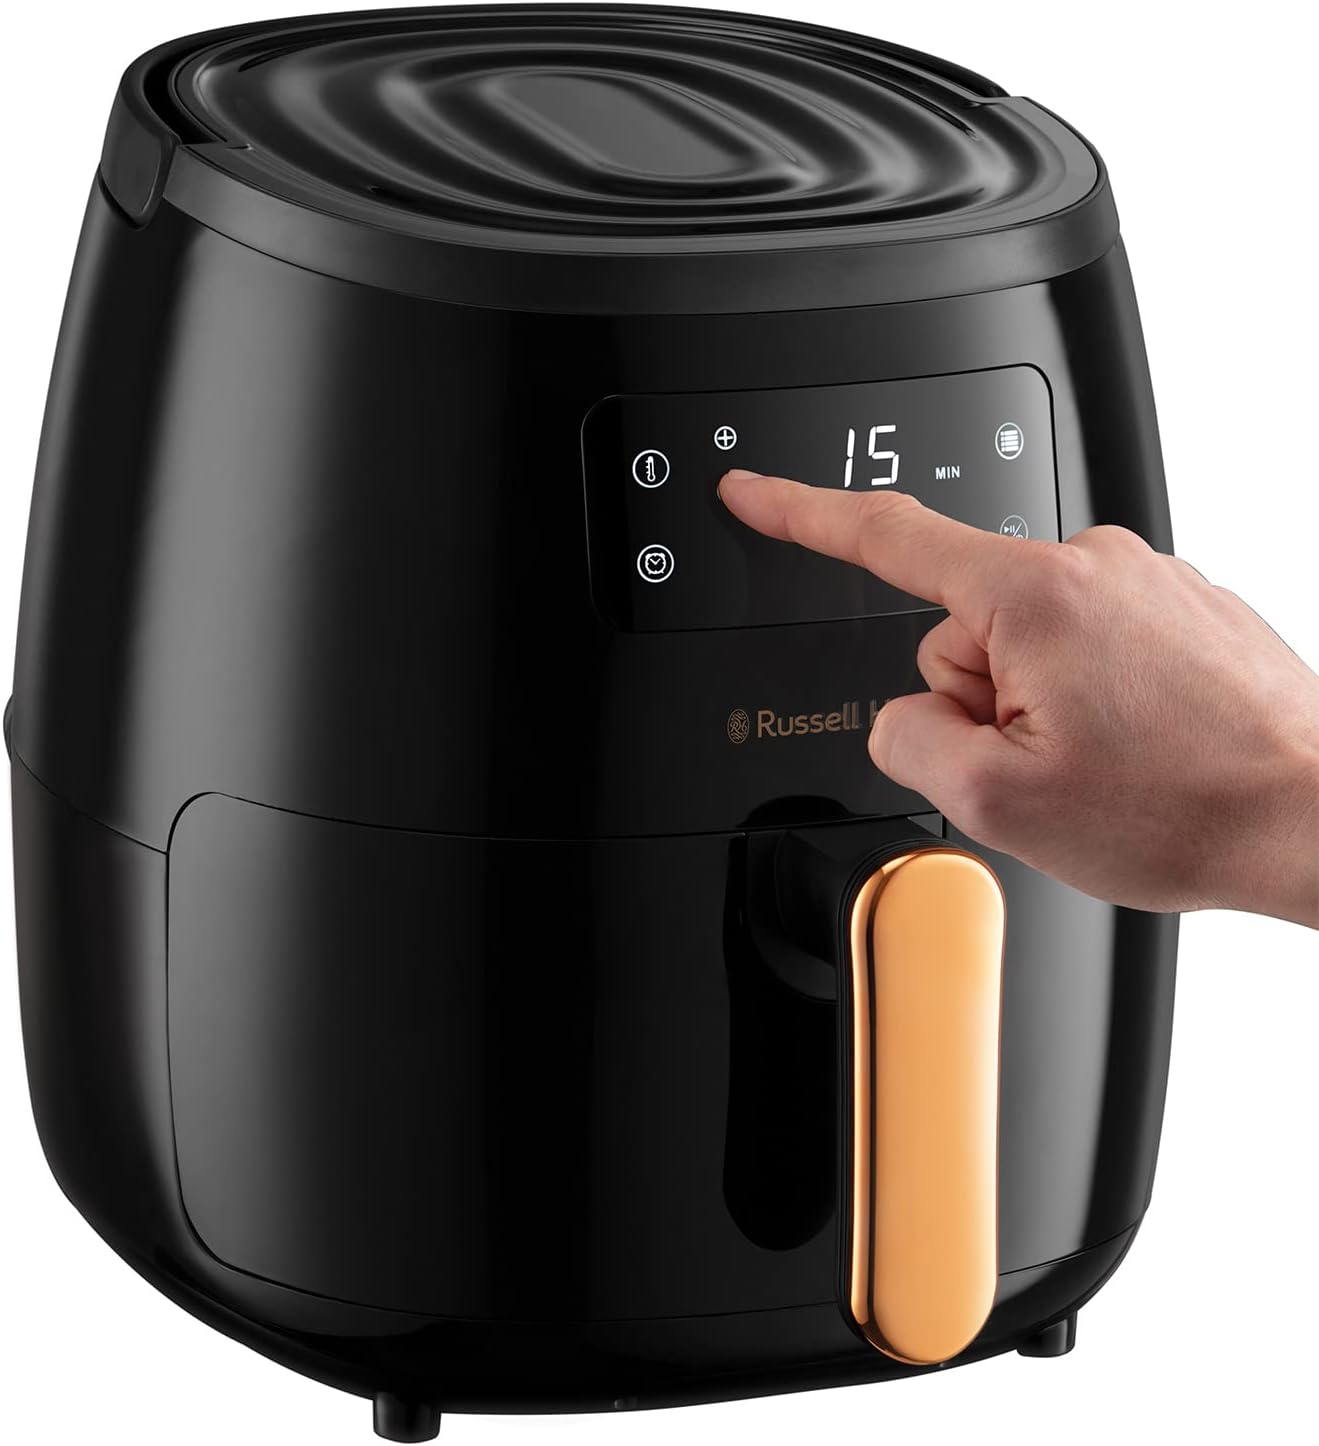 You are currently viewing Russell Hobbs 26510 SatisFry Air Fryer Review